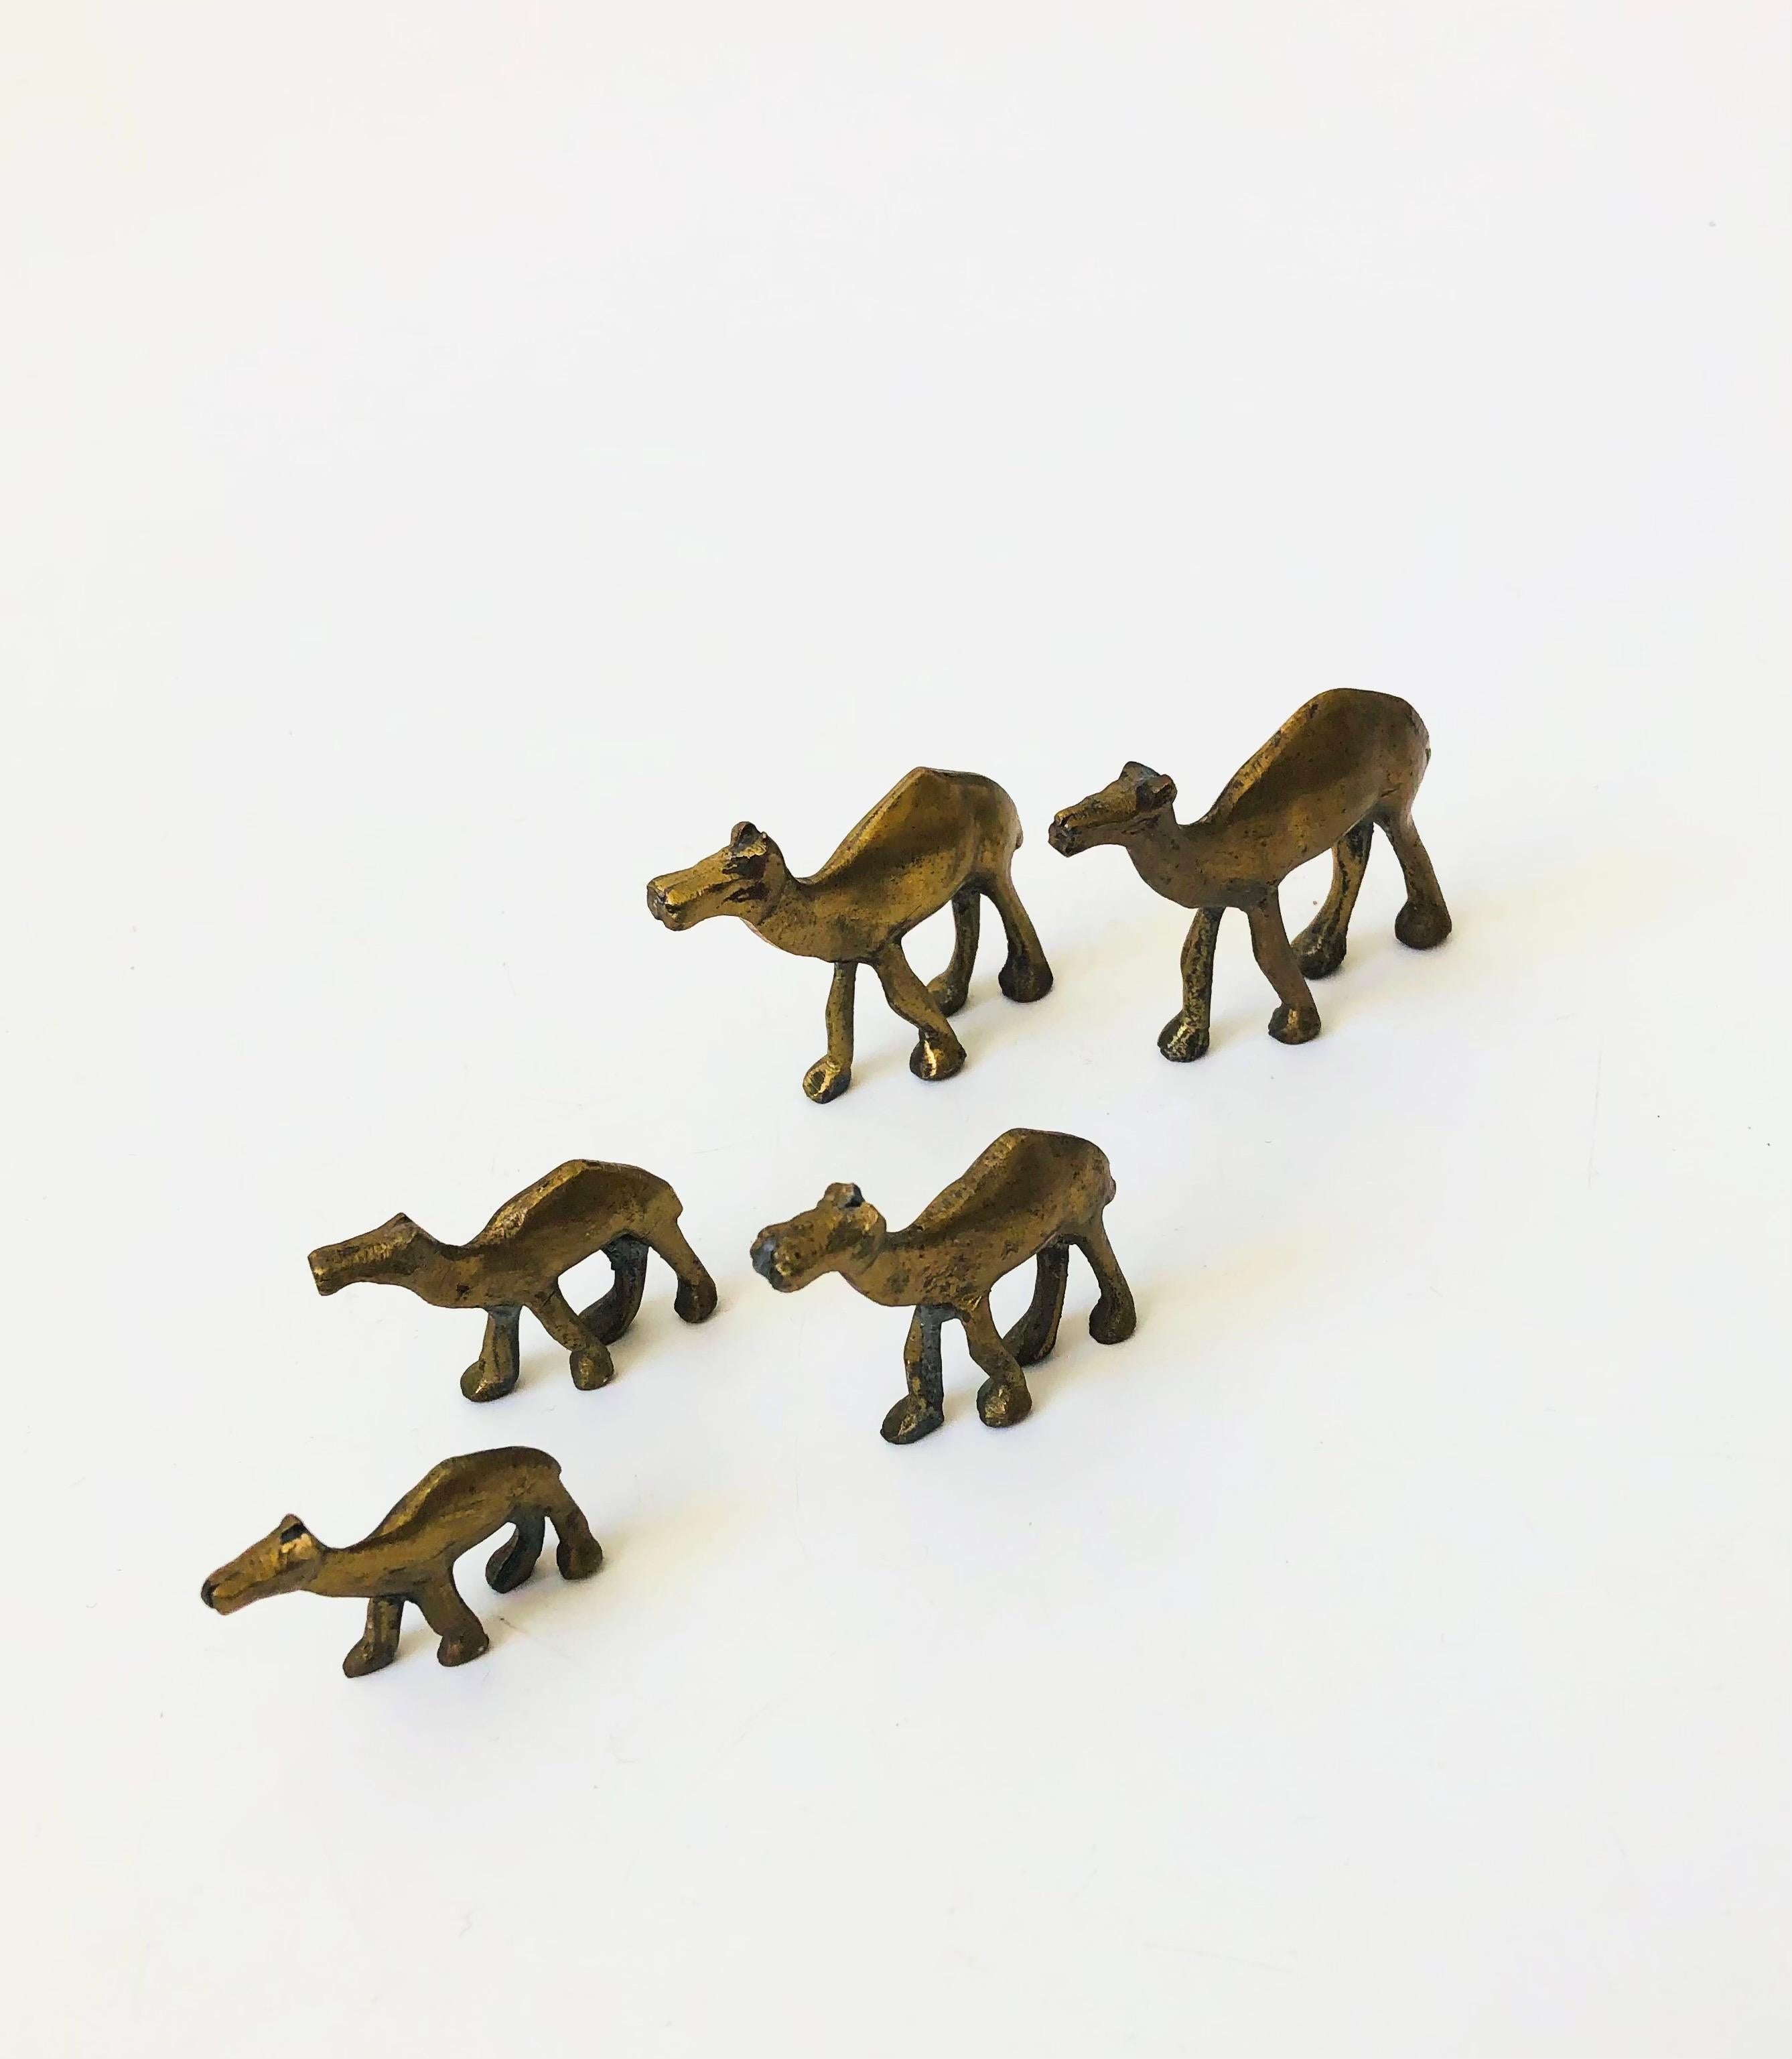 A wonderful set of 5 vintage brass camels in varying sizes. Perfect for creating a little camel herd on your bookshelf.
Each camel varies in size, the smallest is 1.5